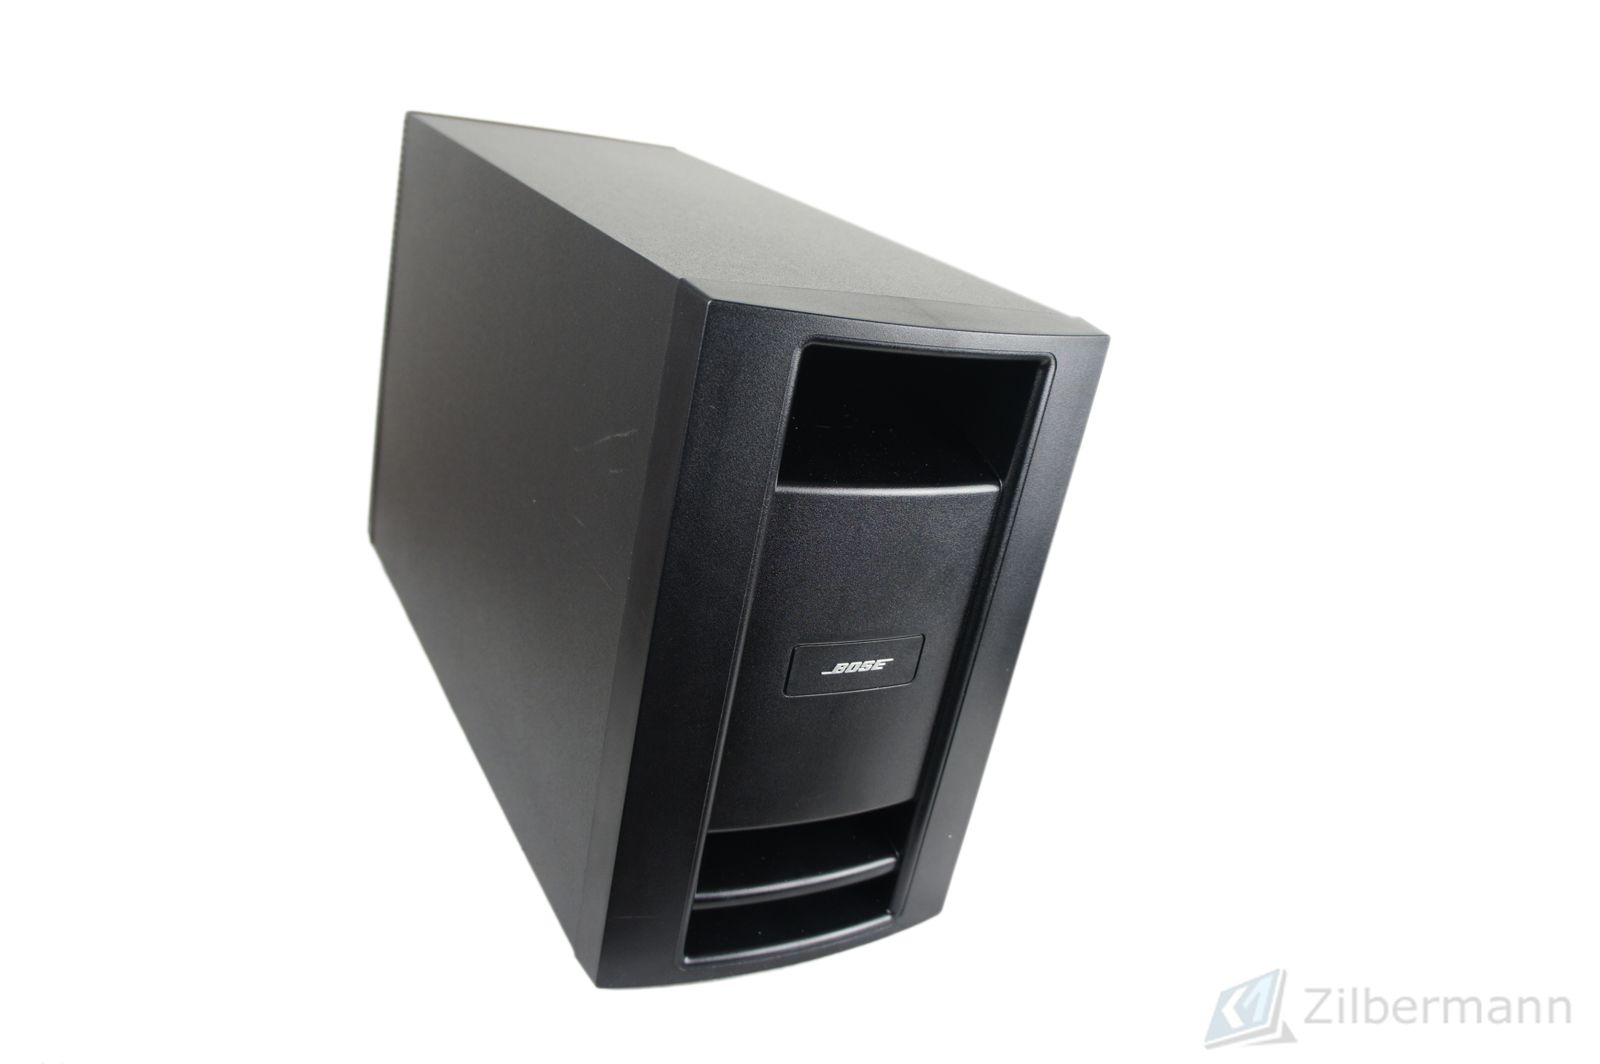 Bose_Lifestyle_T10_5.1_Heimkino-system_Top_02